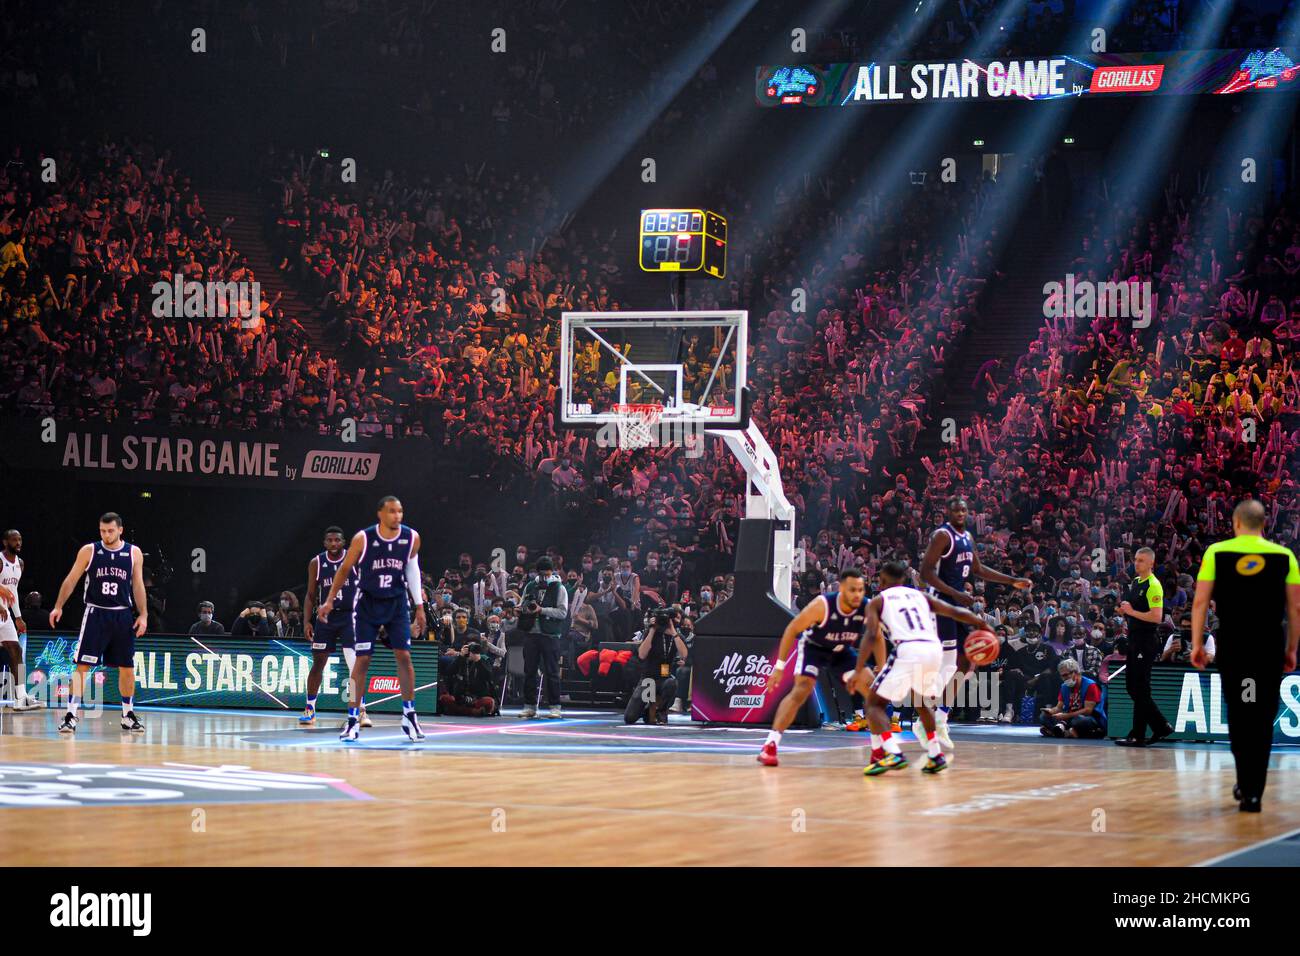 Paris, France. 29th Dec, 2021. All Star Game of championship Elite at the  Accor Arena in Paris-Bercy. More than 16,000 spectators attended the French  basketball show in Paris, France on December 29,